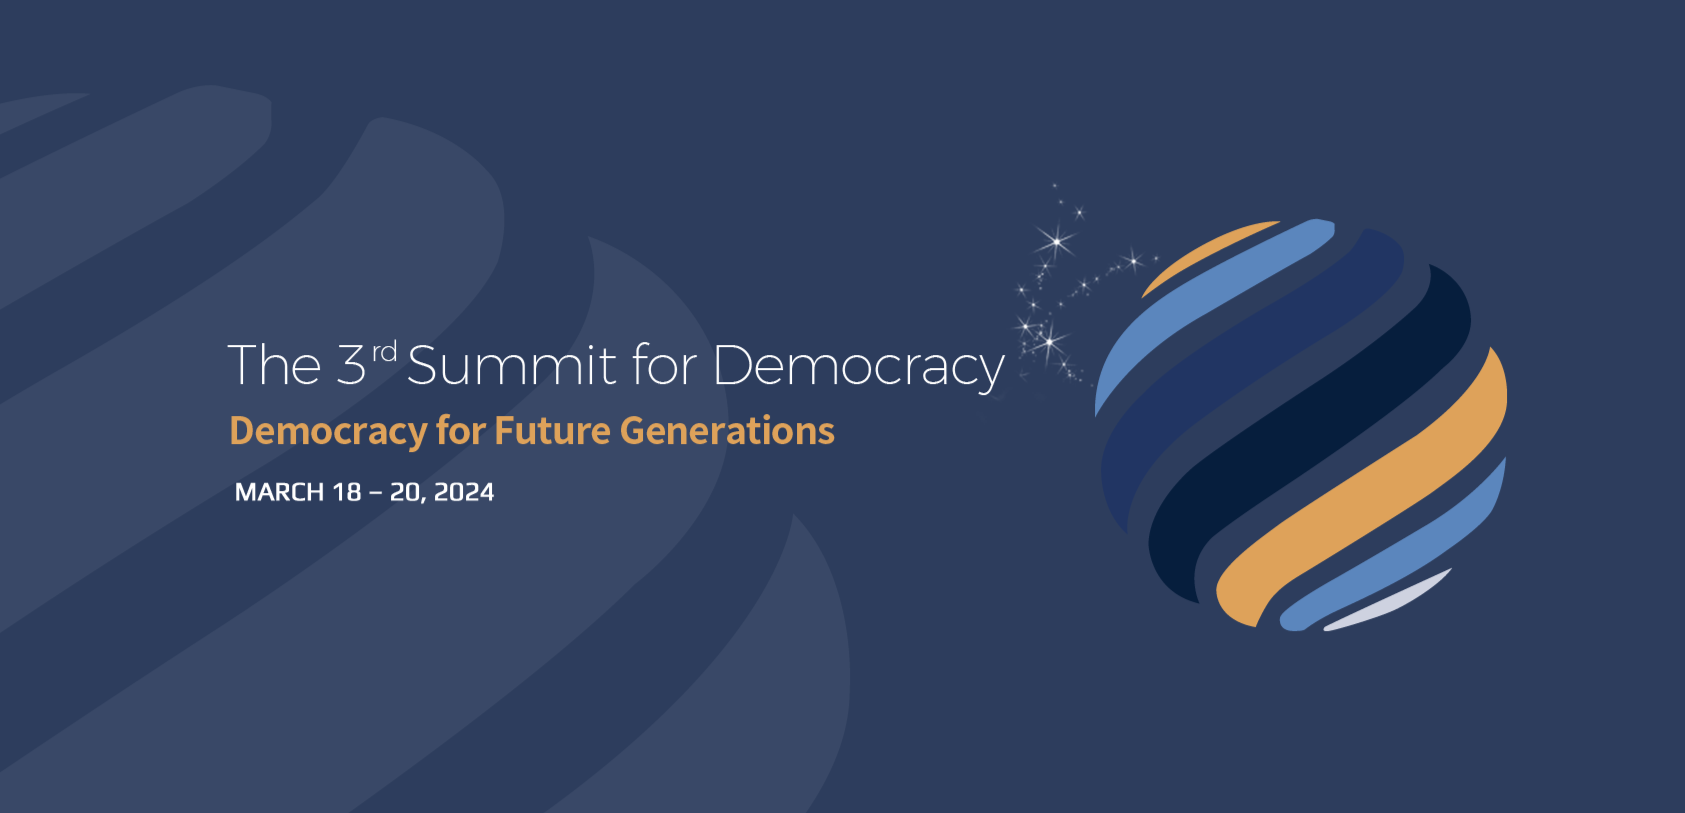 The third Summit for Democracy takes place on 18-20 March 2024 in Seoul, the Republic of Korea, under the theme 'Democracy for Future Generations'. © The 3rd Summit for Democracy Preparatory Office 페이지북 인스타그램